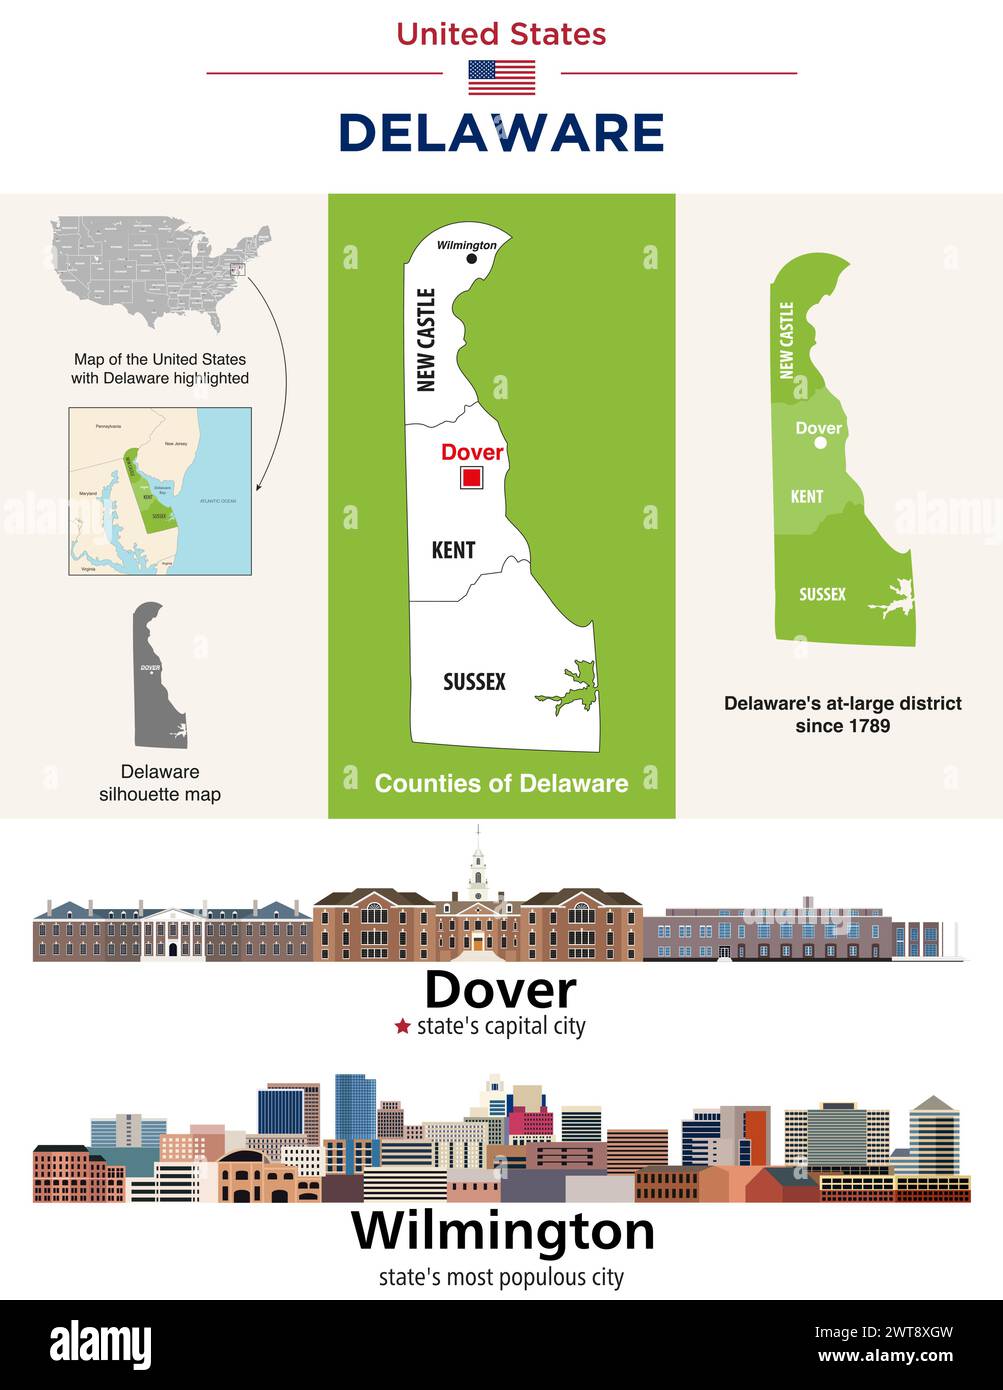 Delaware counties map and at-large congressional district map. Skylines of Dover (state's capital city) and Wilmington (state's  most populous city). Stock Vector